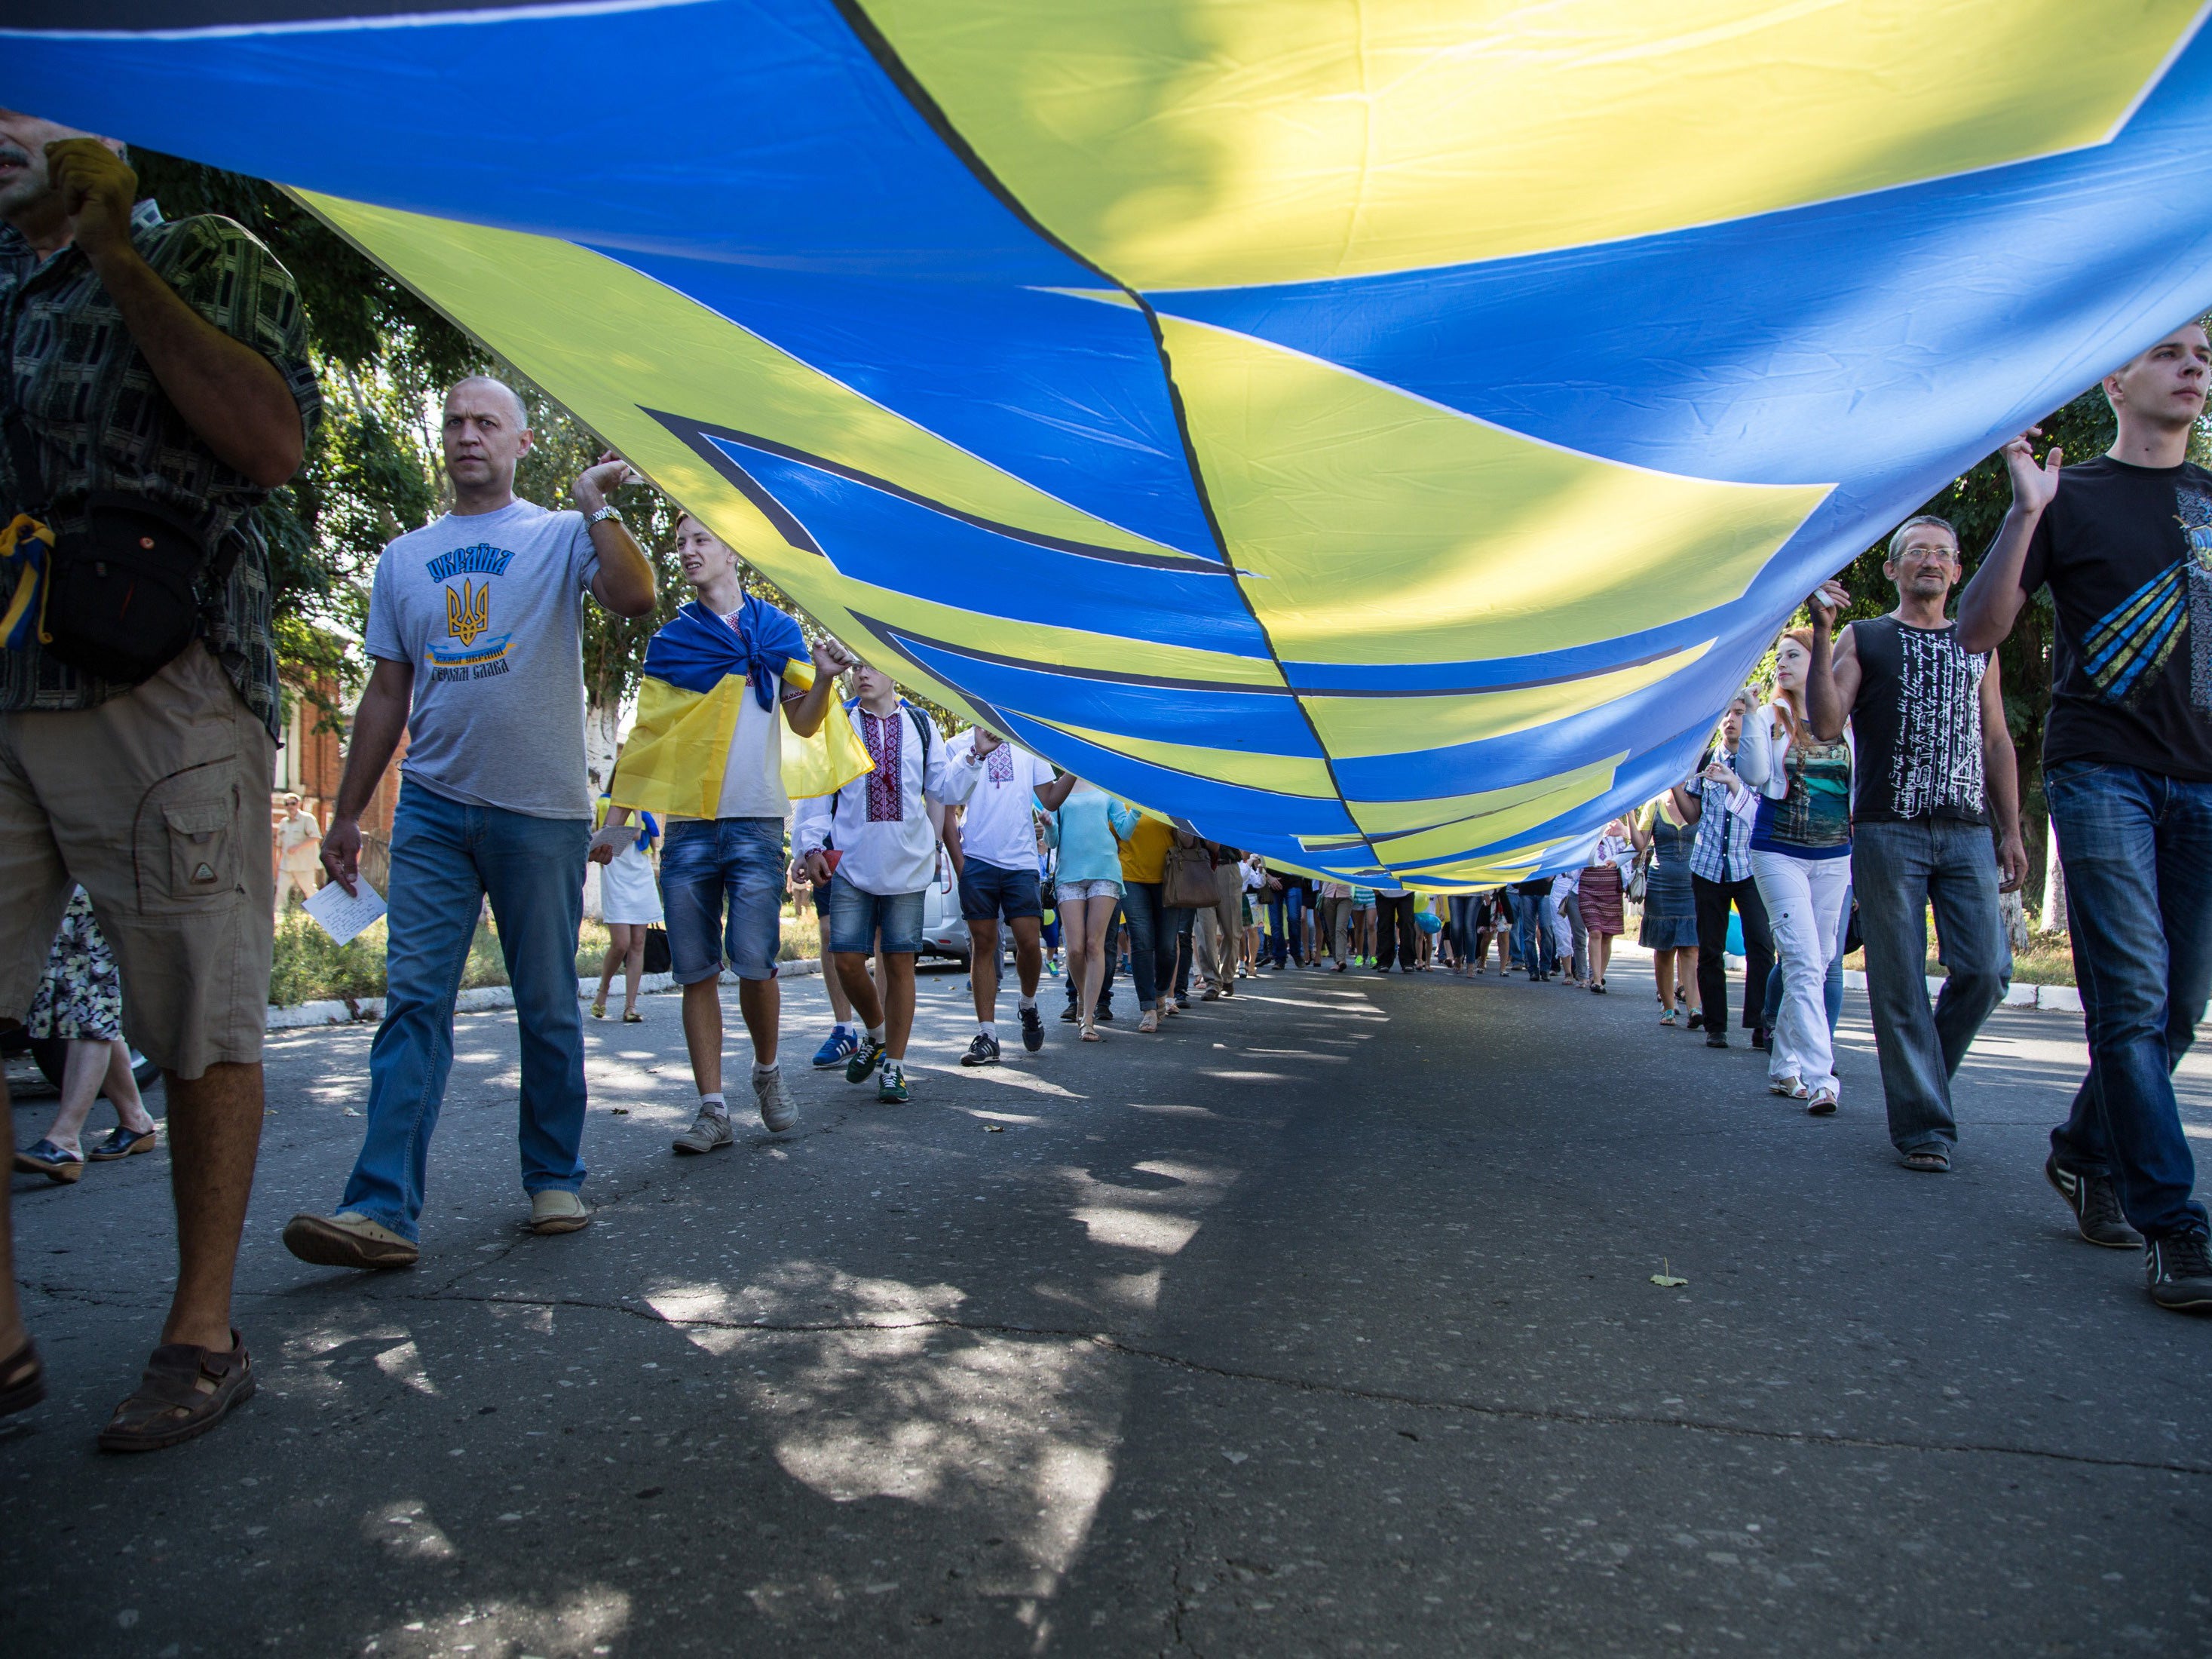 Demonstrations took place across the country to mark Ukraine's independence day. Source: Getty Images